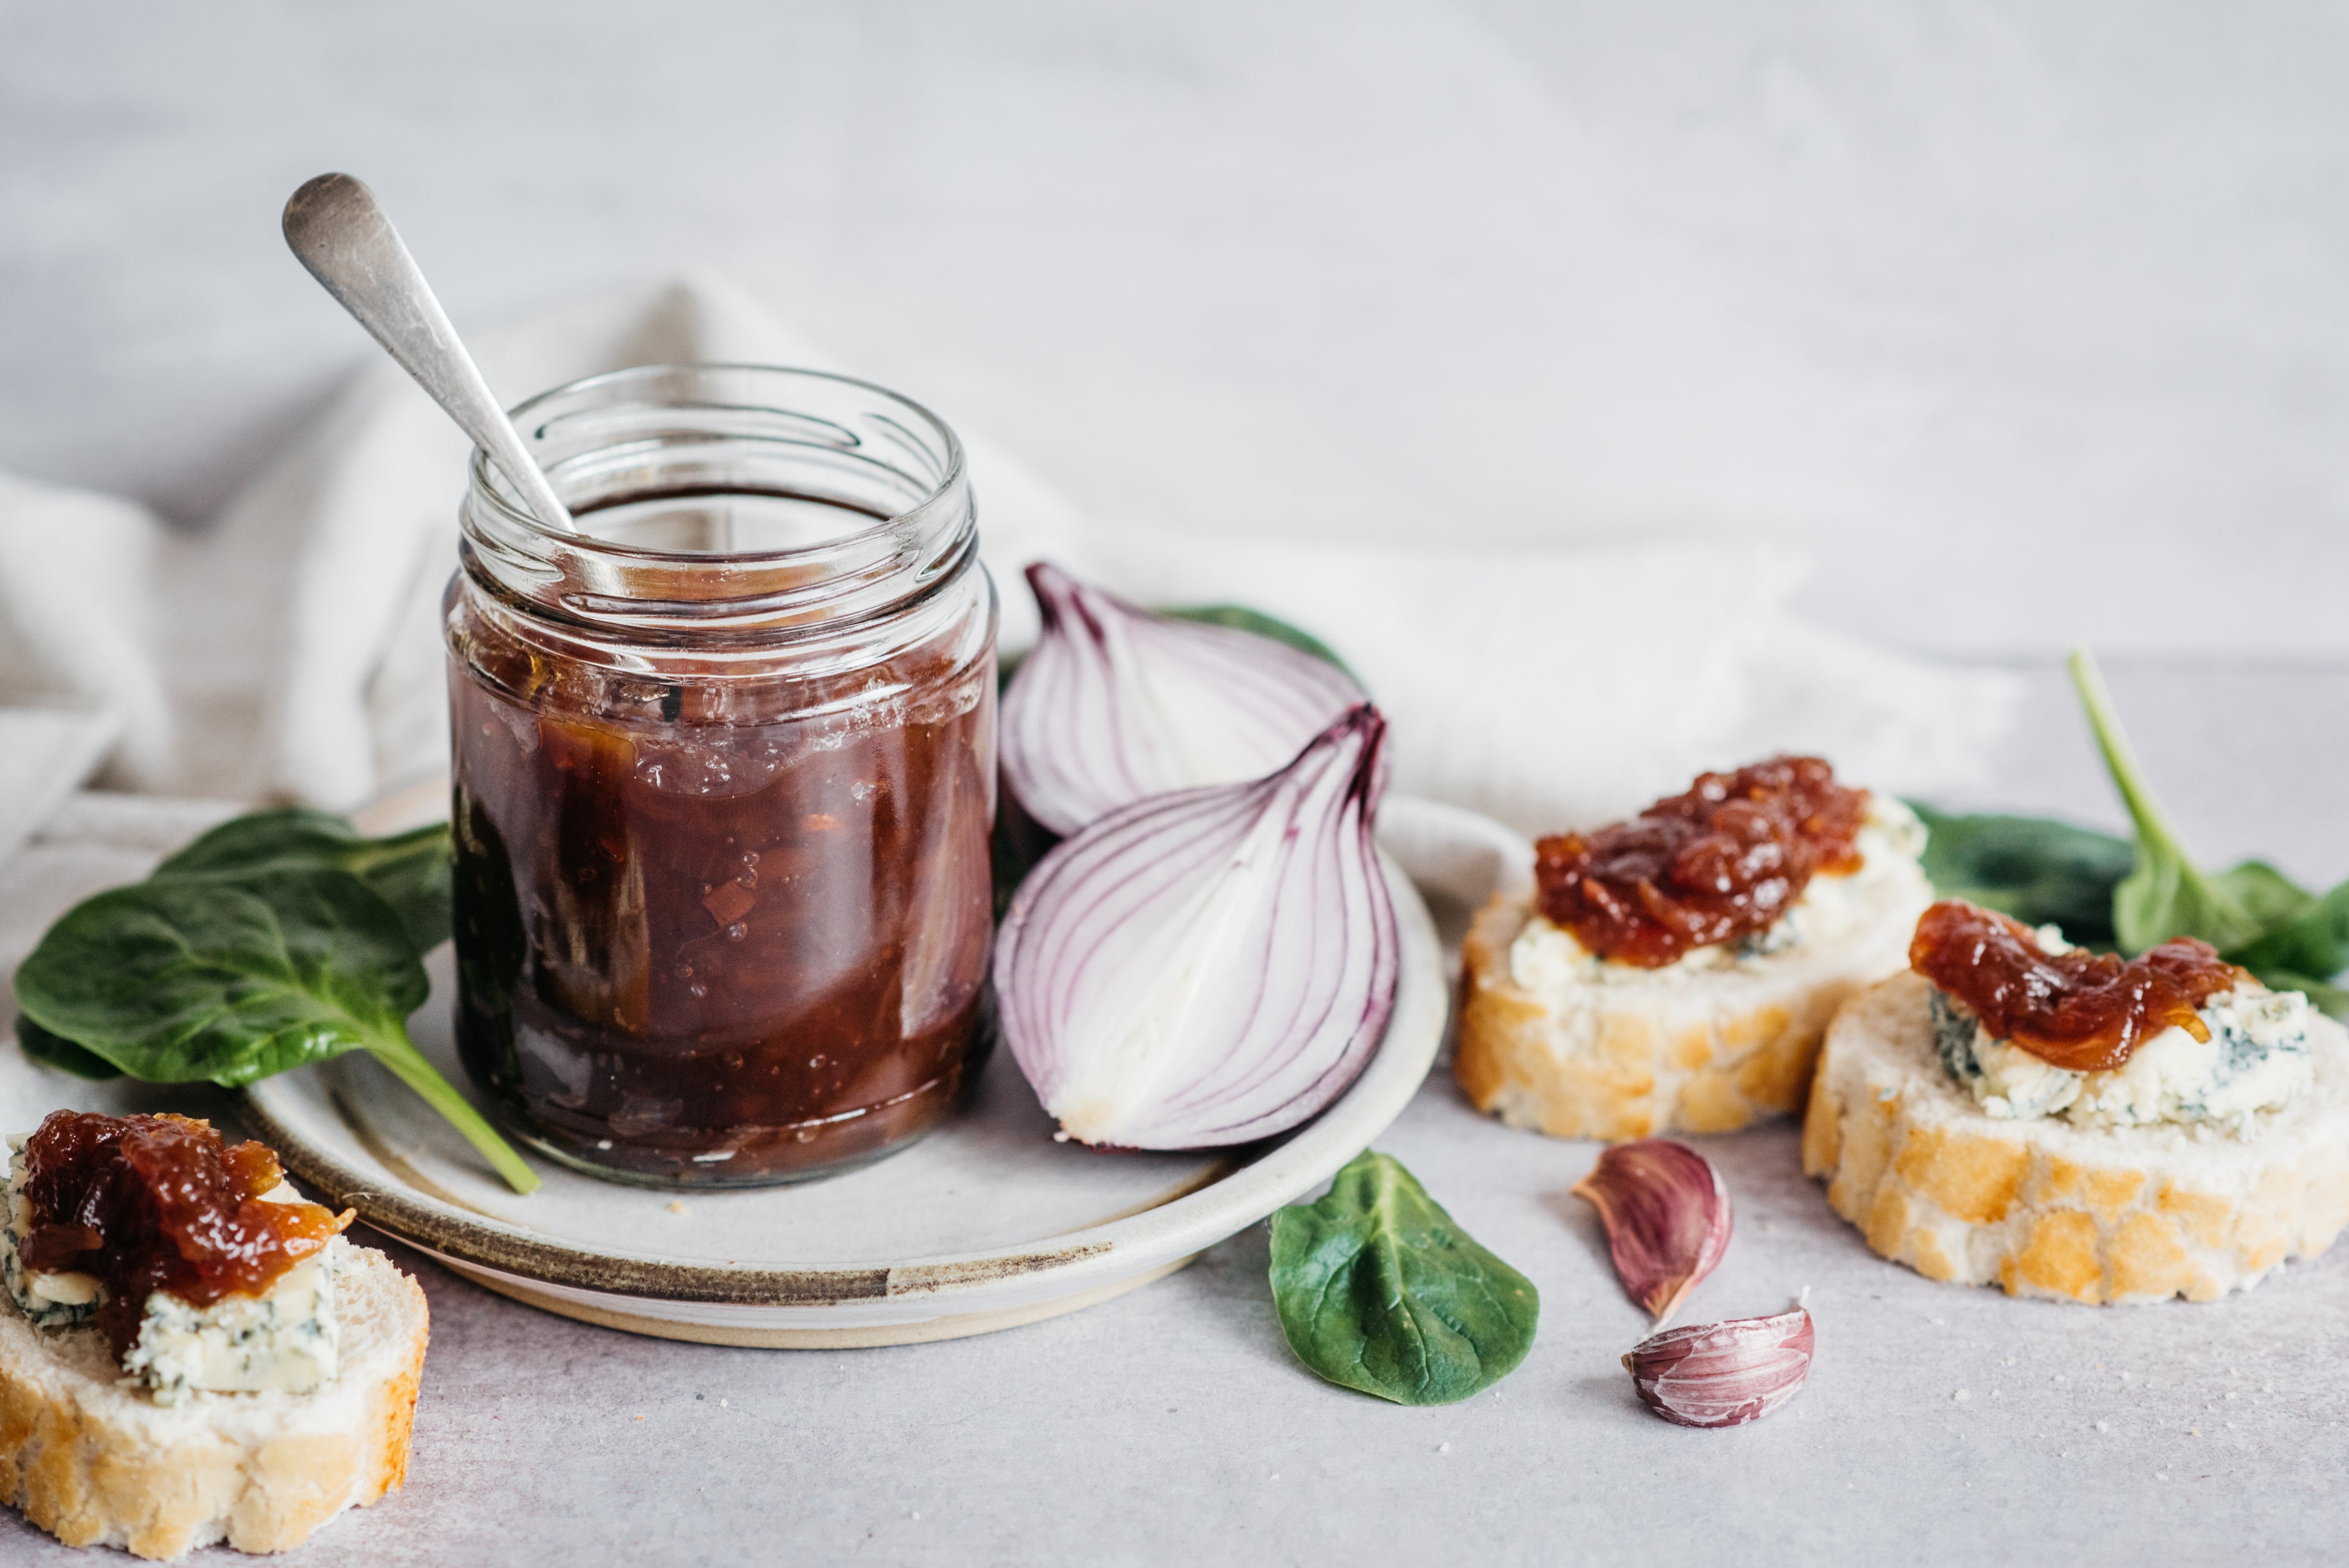 Jar of onion chutney, 3 rounds of bread with cheese and chutney, basil leaves and an onion chopped in half